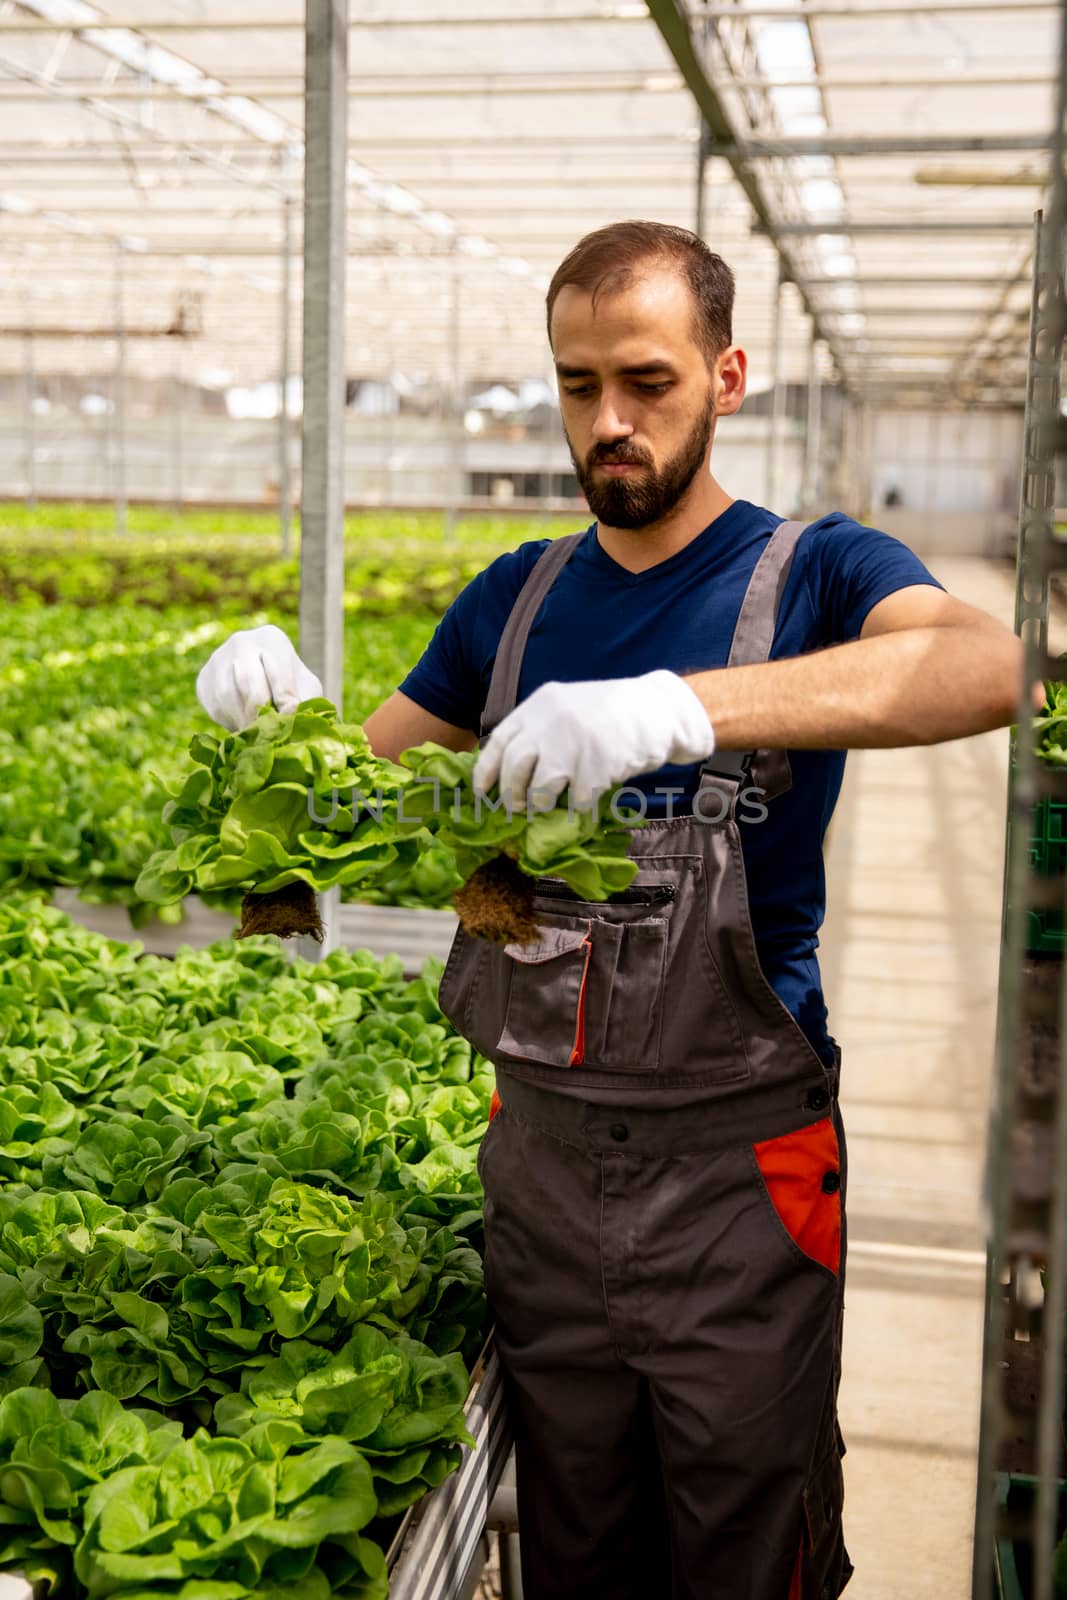 Worker holding 2 salads in his hand and preparing to put them in the crate. Young worker and greenhouse